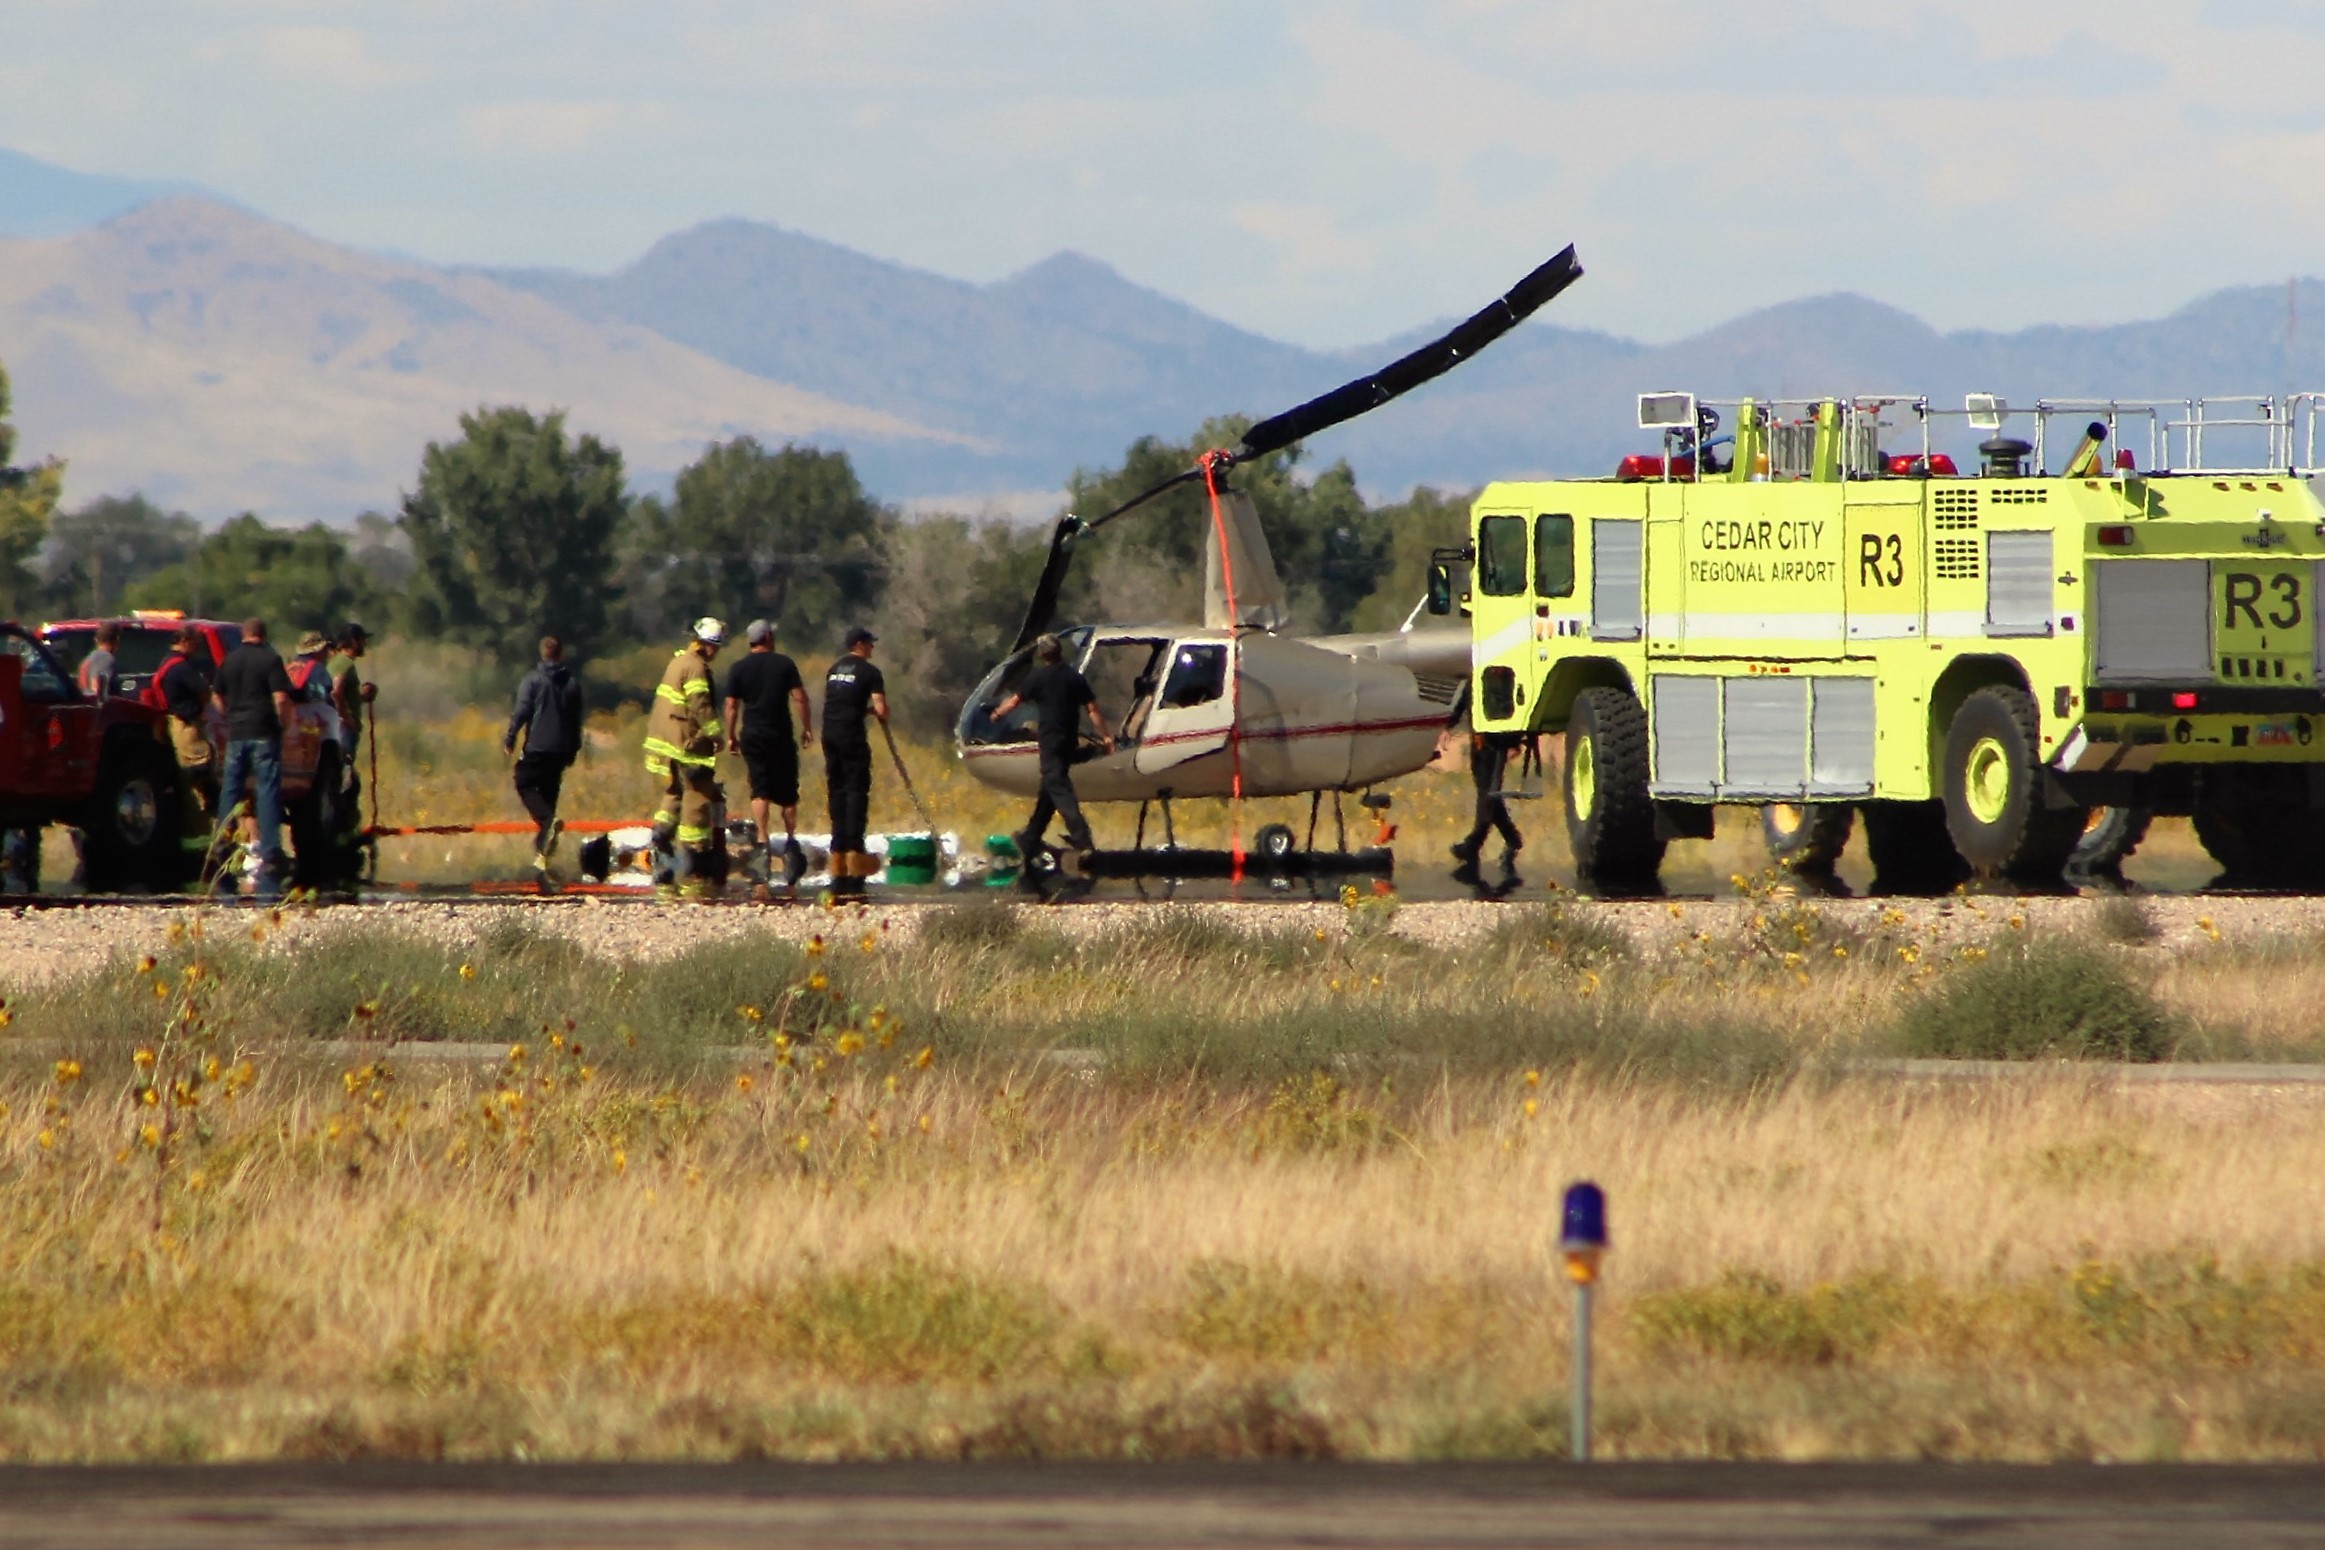 A helicopter crashed at Cedar City Airport Wednesday. Cedar City, Utah, Sept. 14, 2016 | Photo by Tracie Sullivan, St. George News